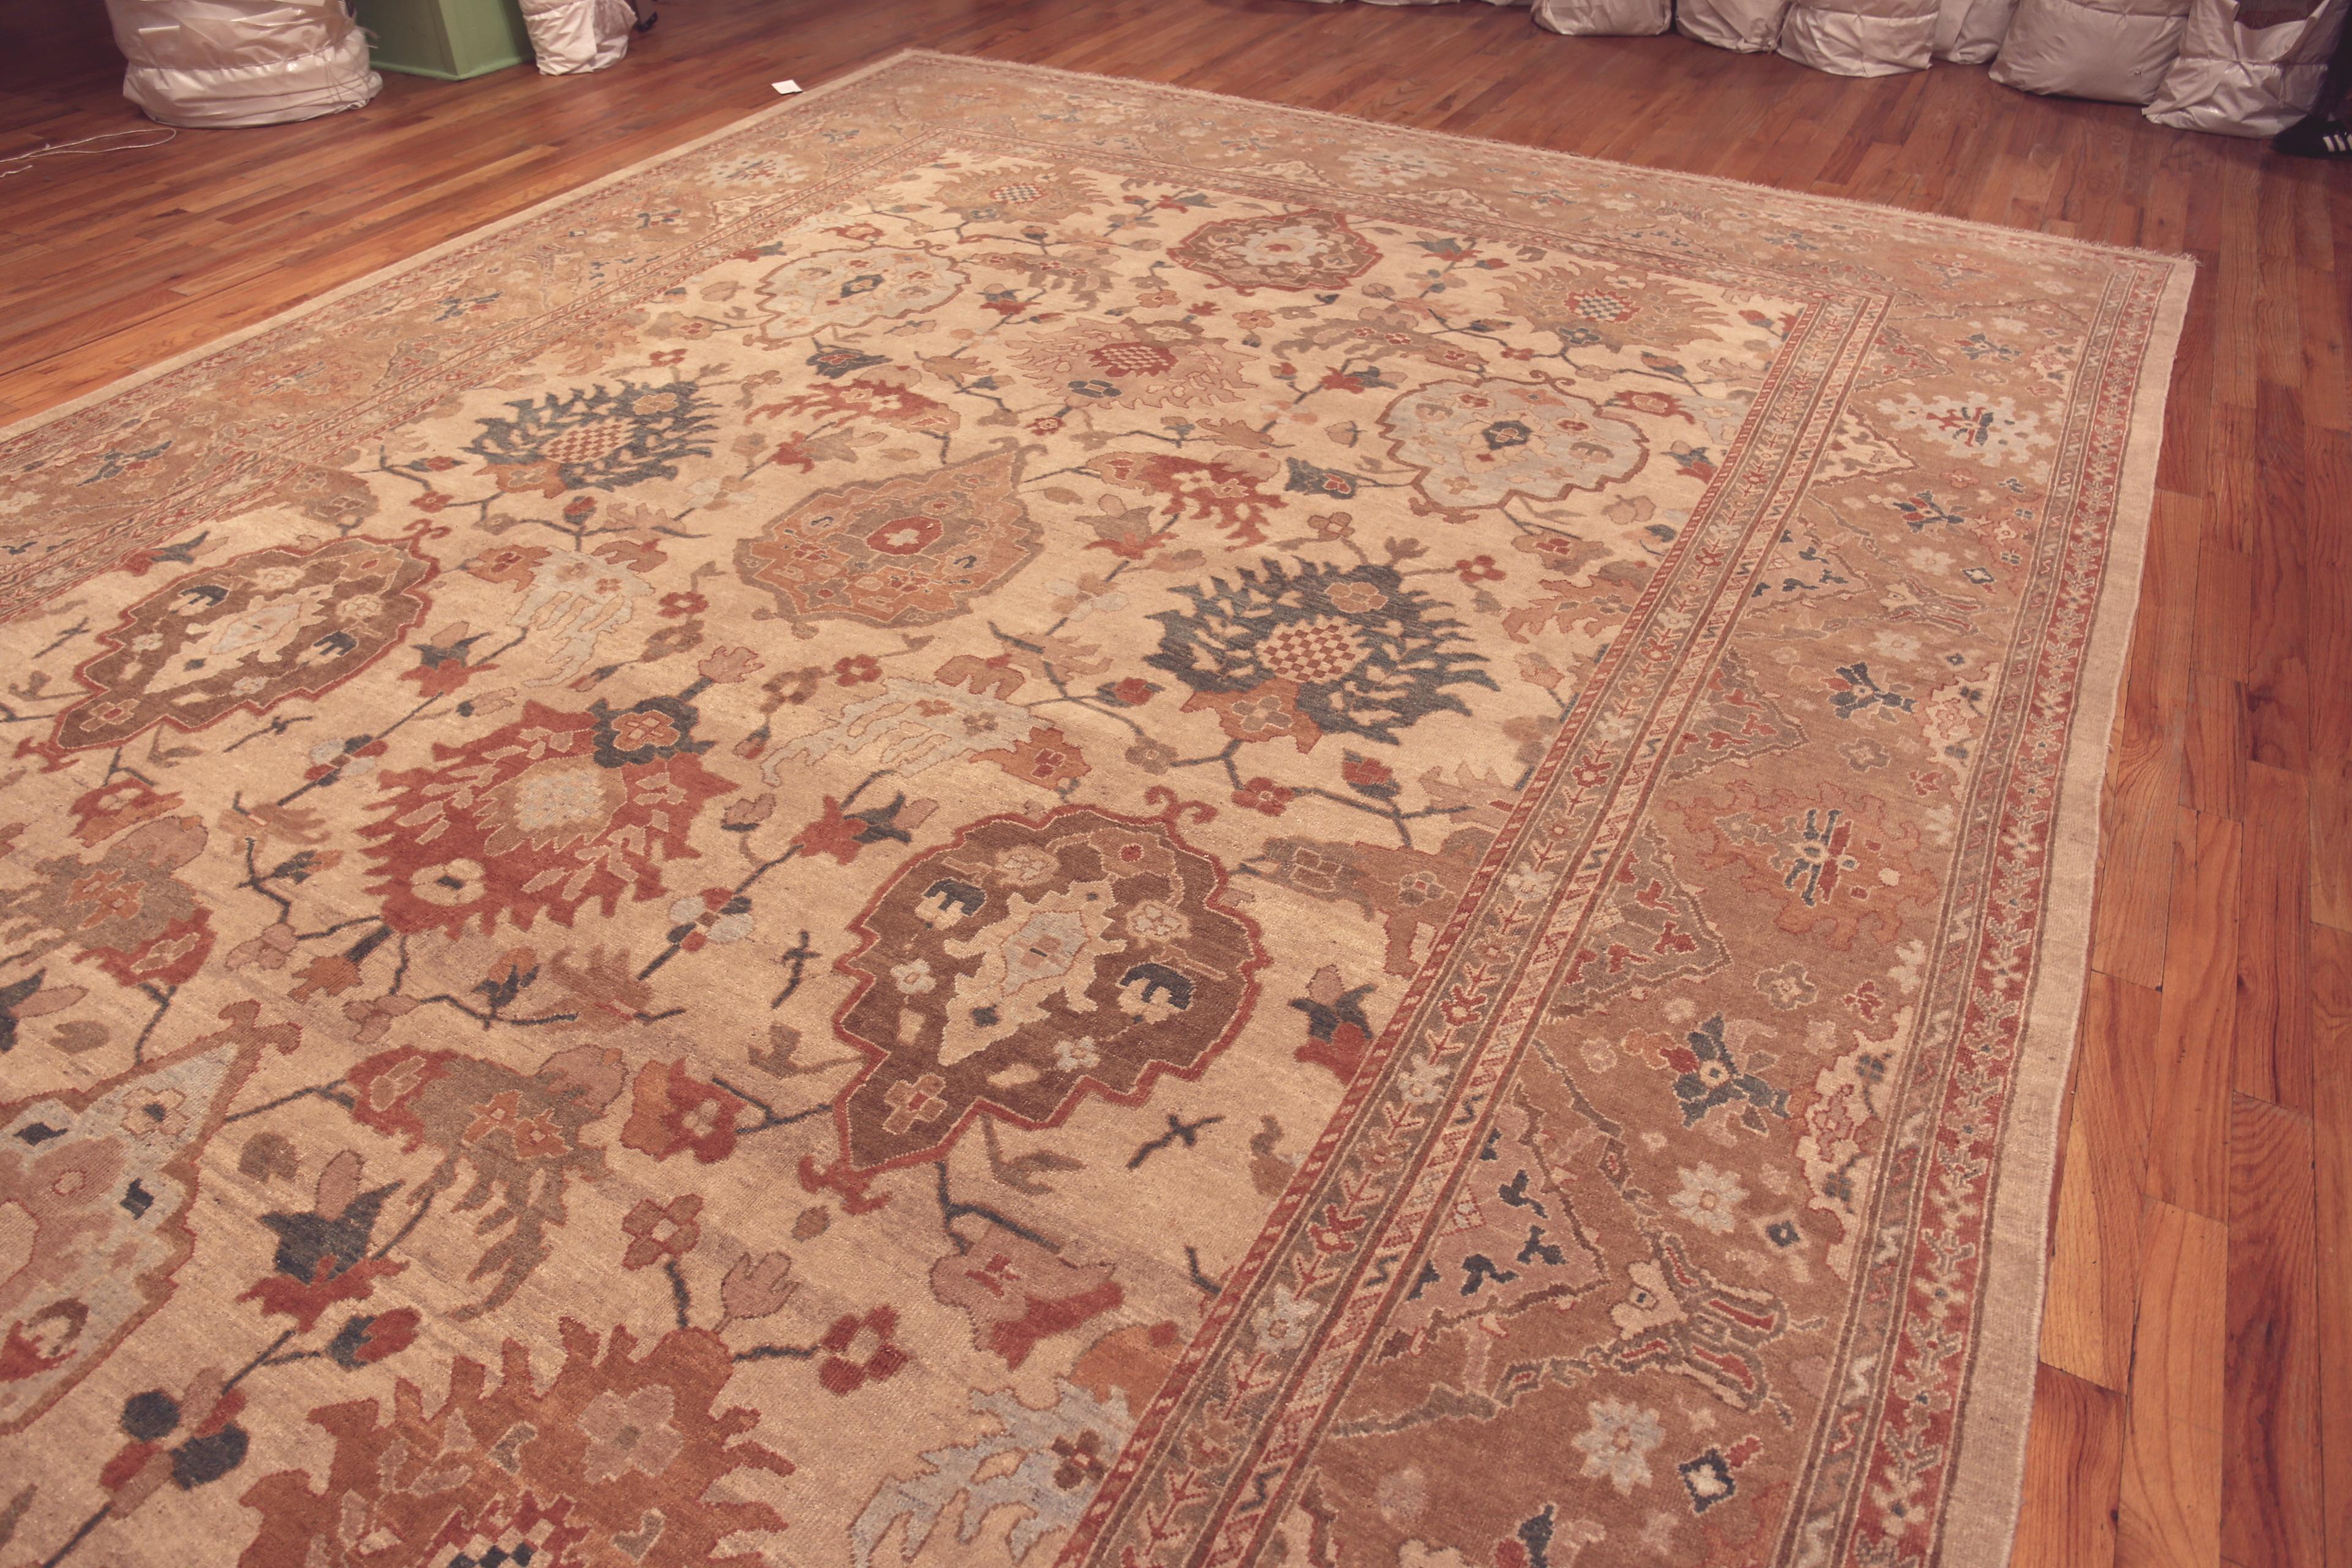 Perse Collection Nazmiyal - Grand tapis persan moderne de Sultanabad. 12 pieds 6 po. x 17 pieds 6 po. en vente